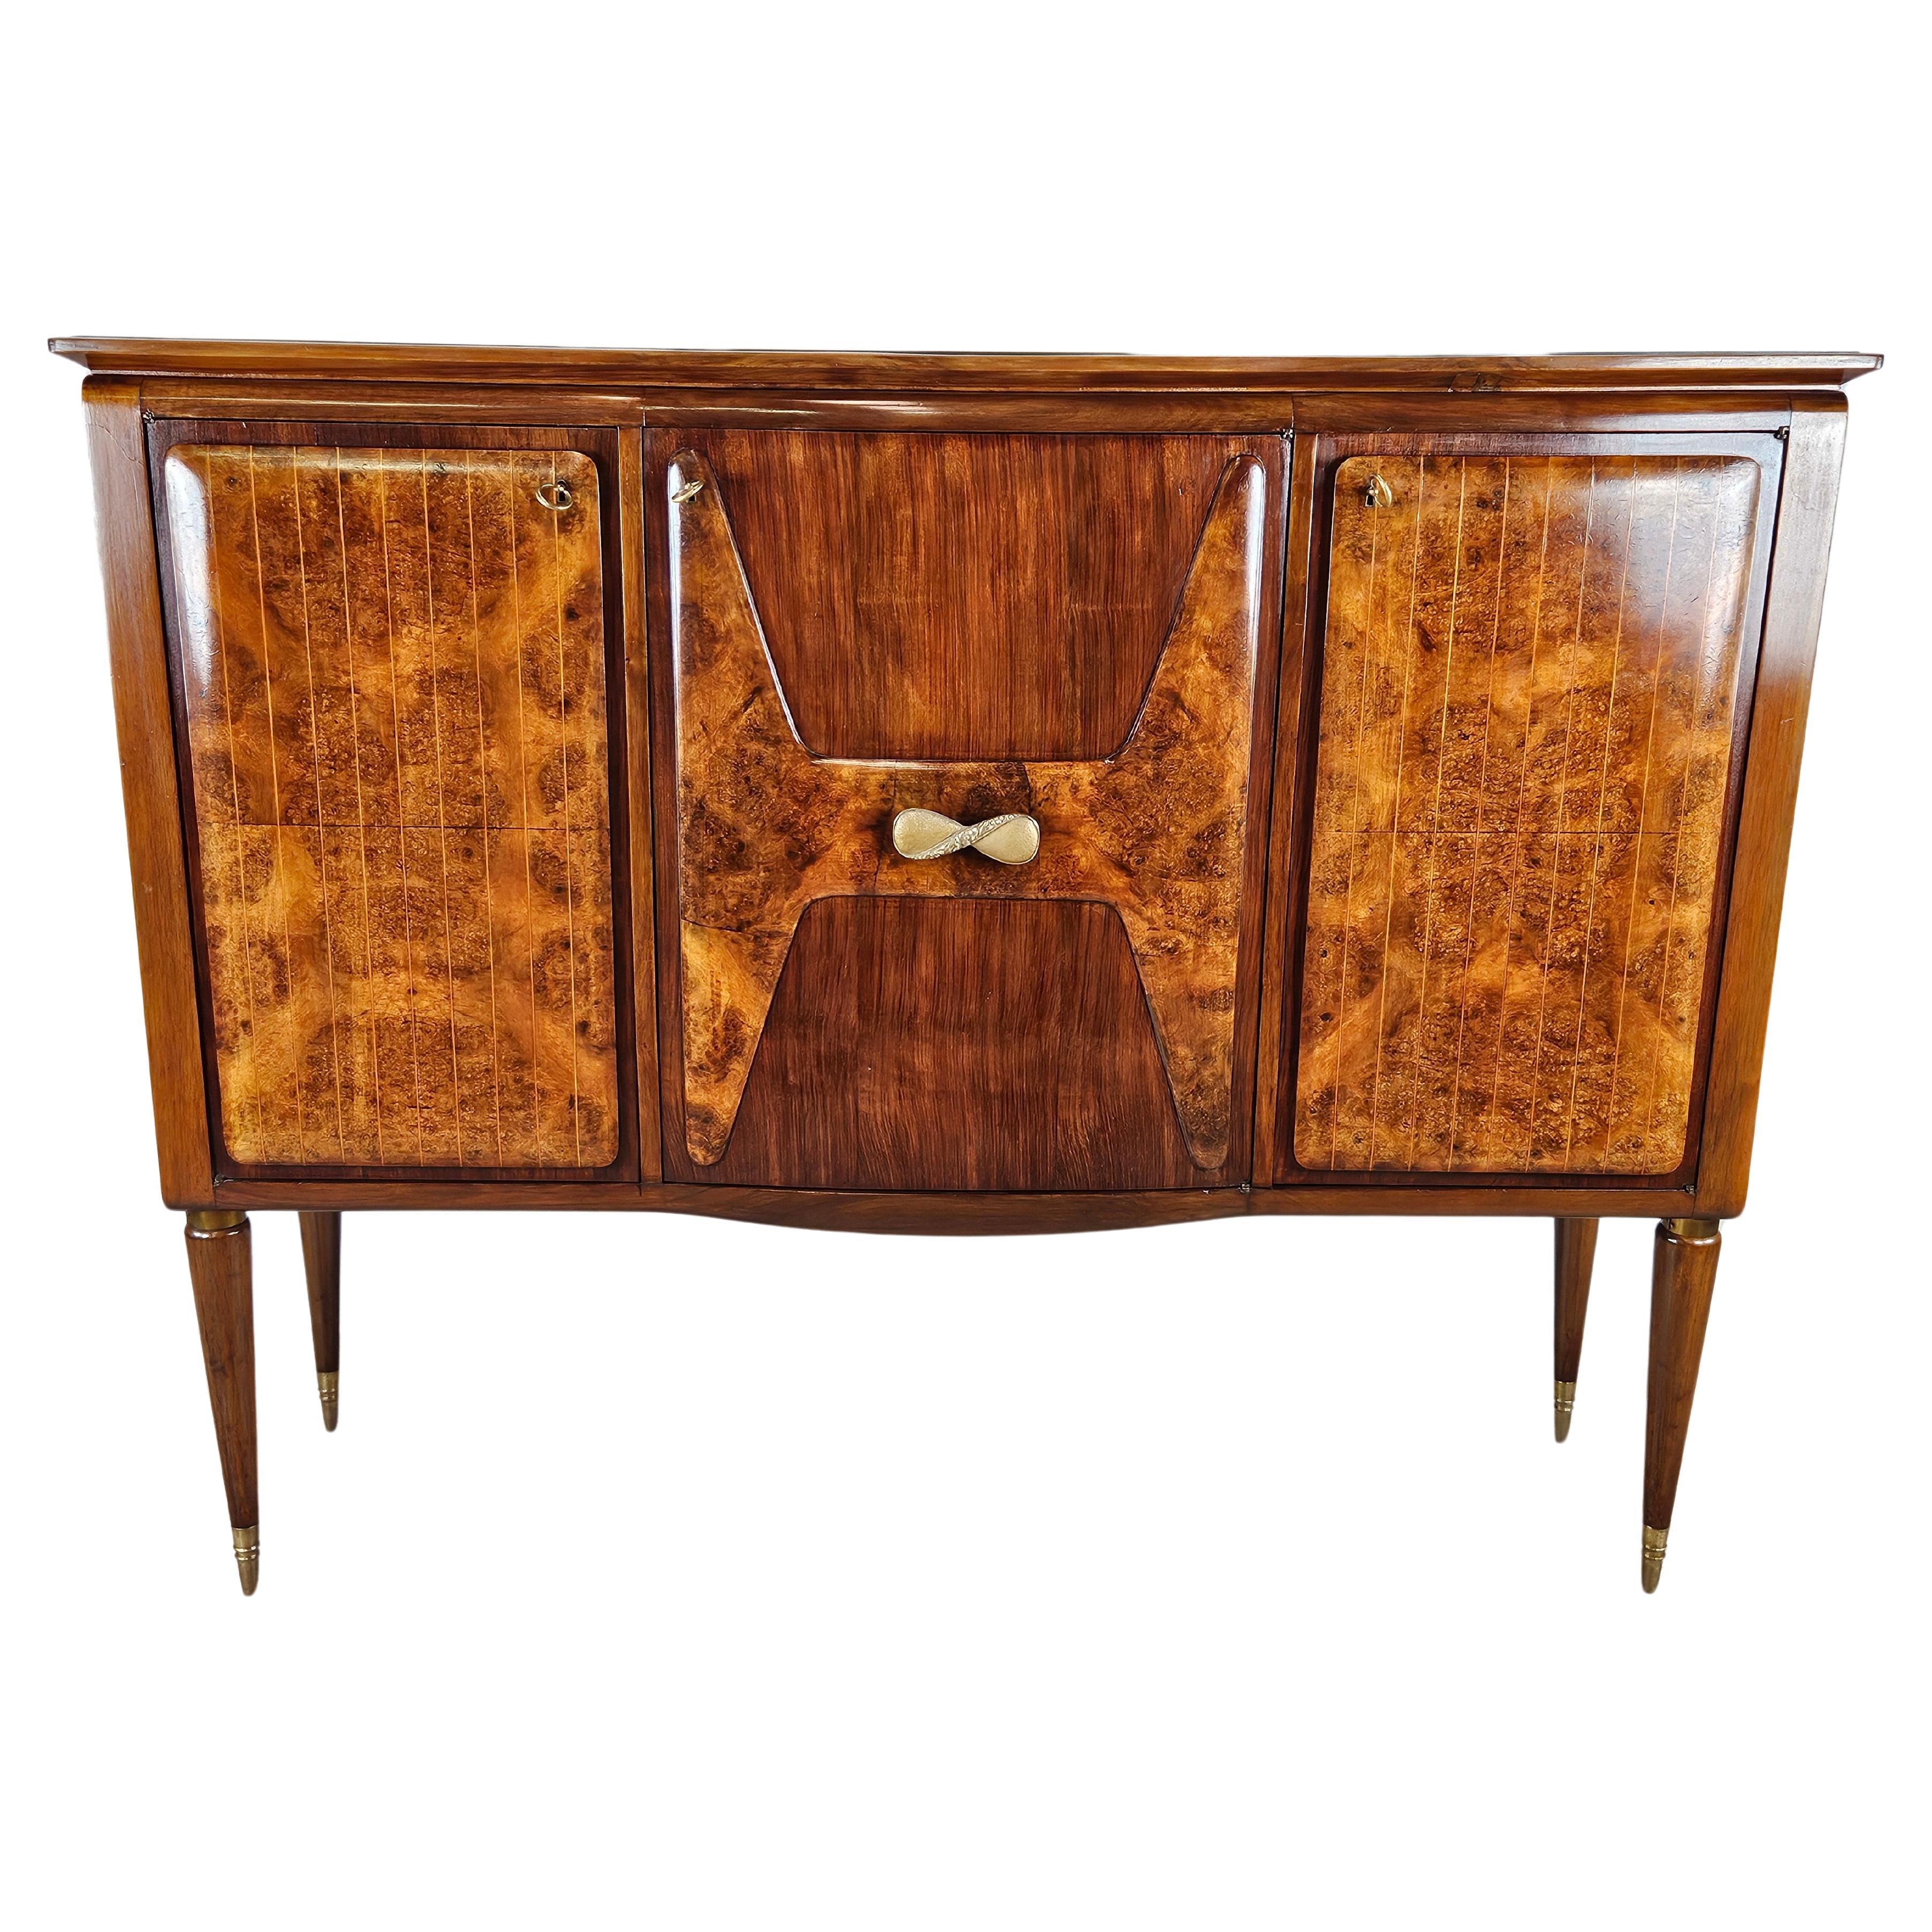 1940s-1950s walnut and maple sideboard with lighted compartment